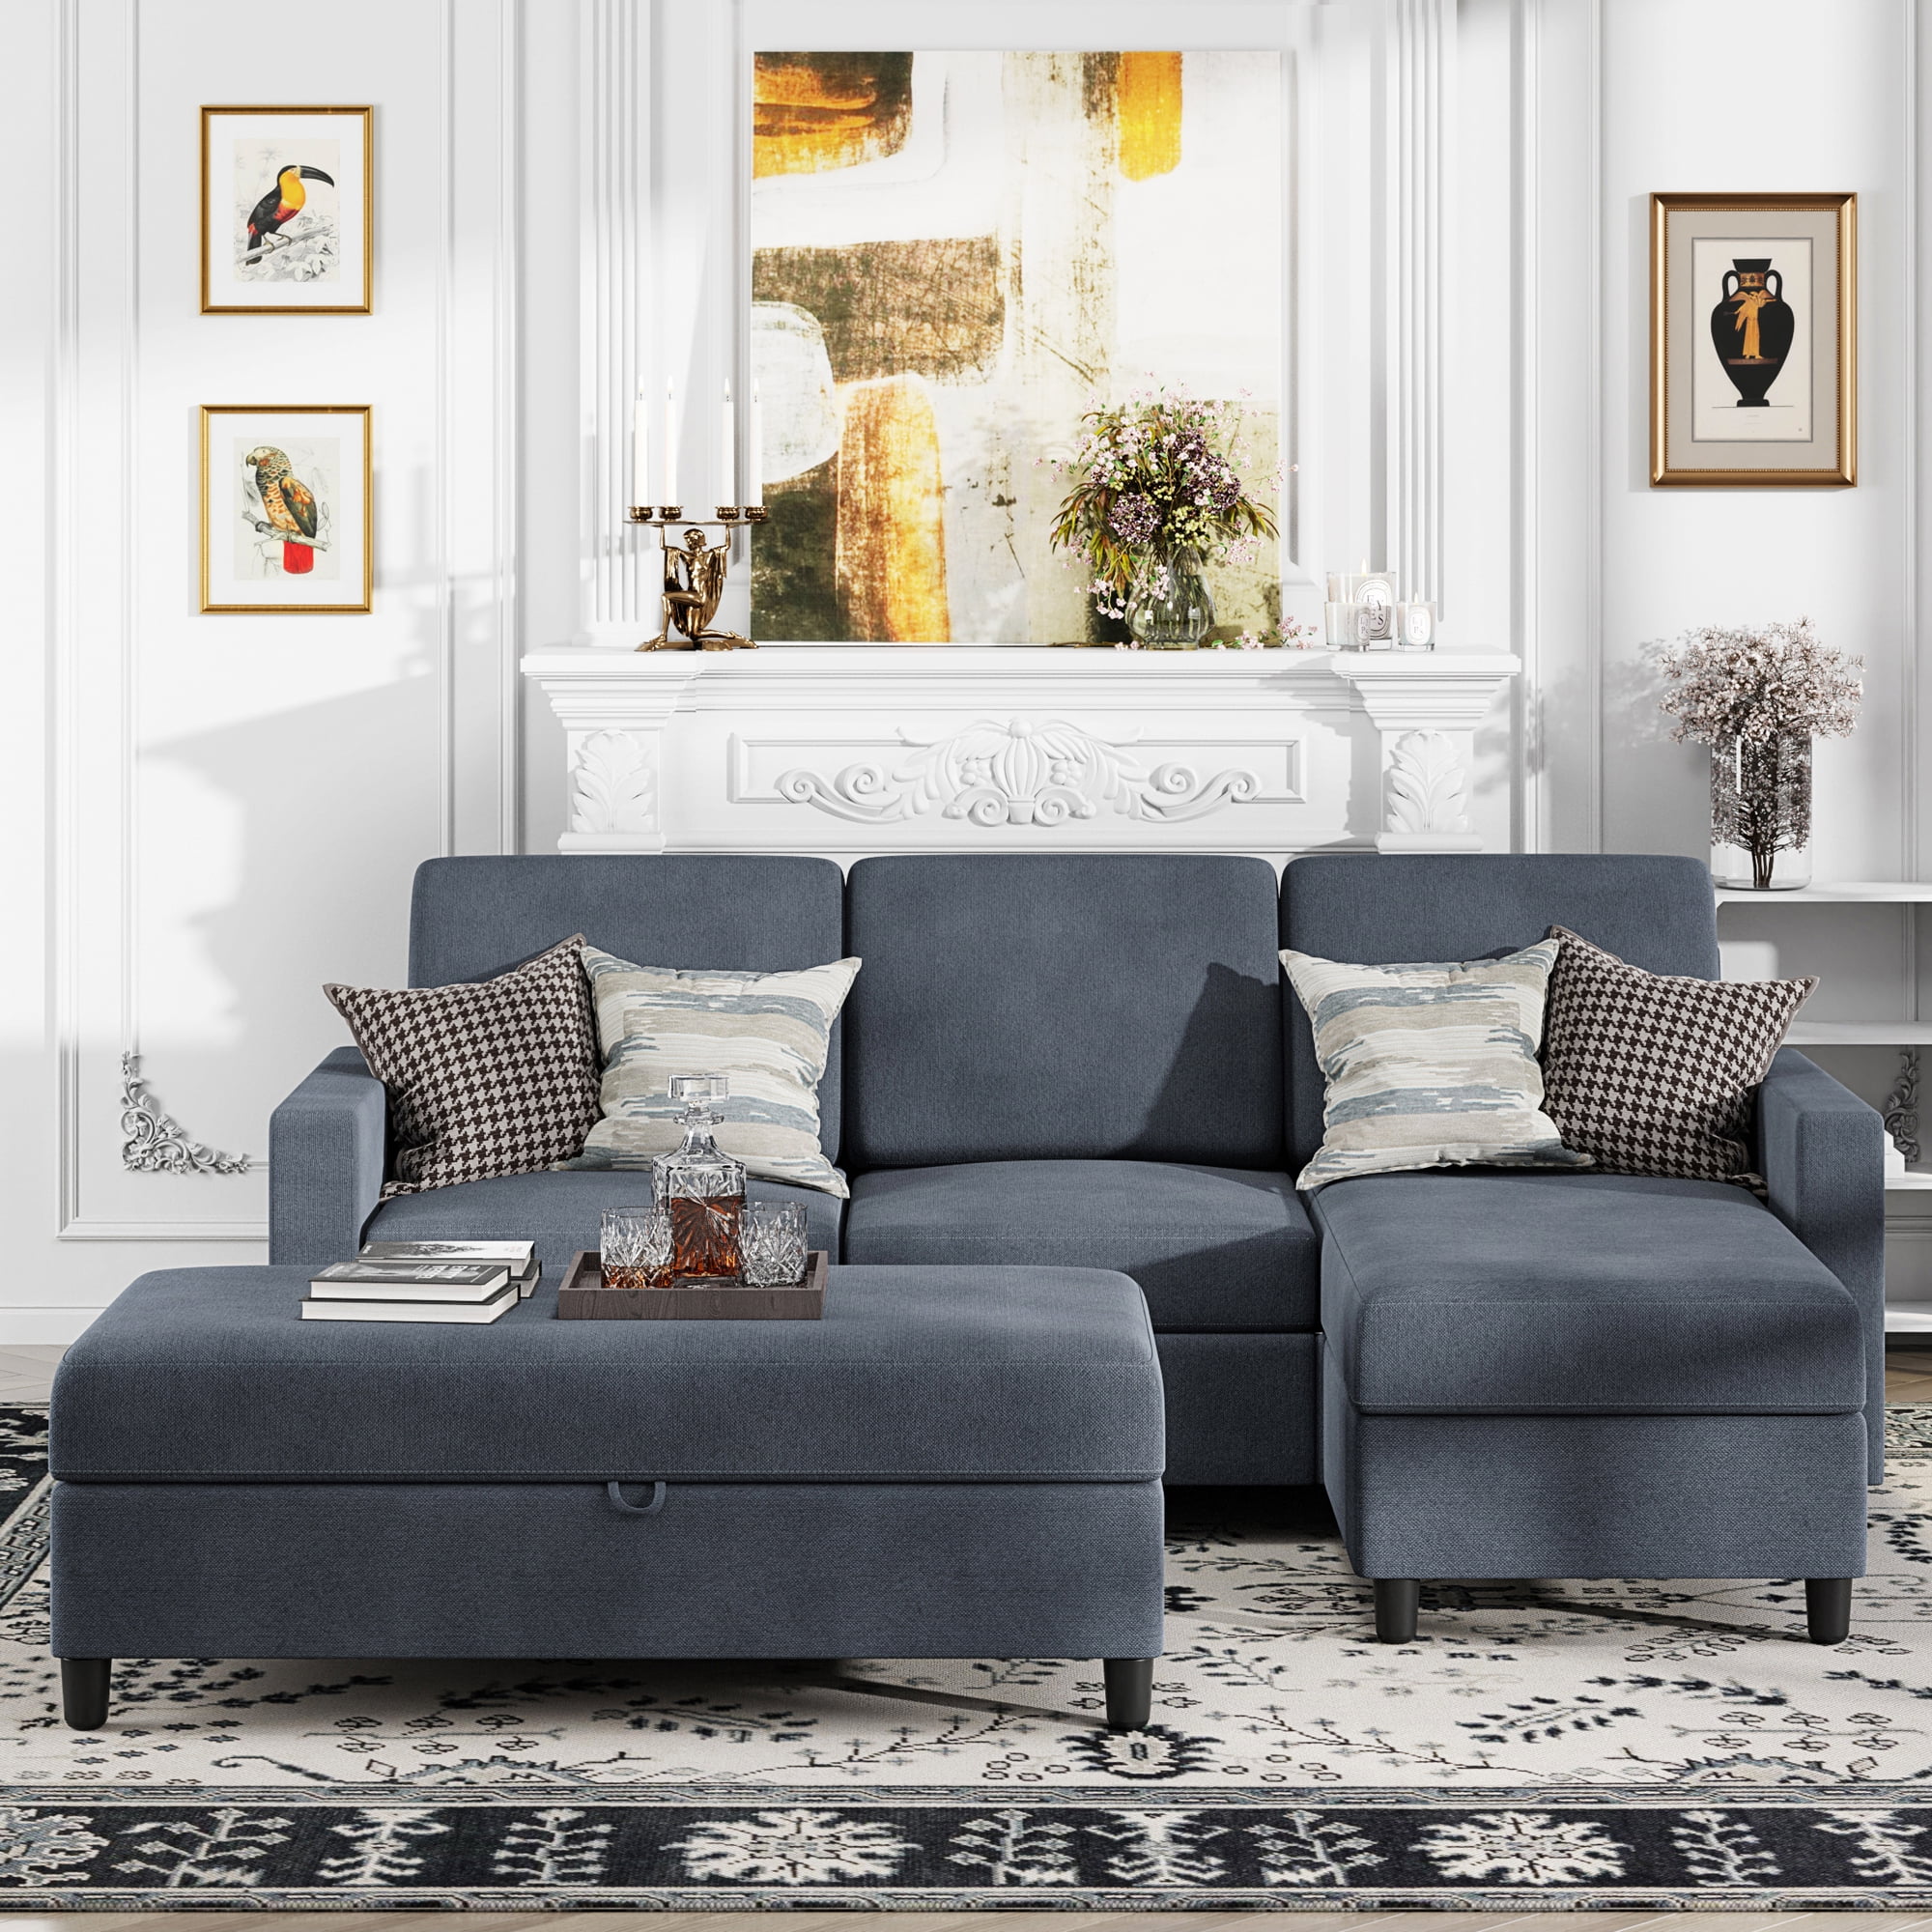 12 Cheap Sectional Couches Under 500 That Look Luxurious